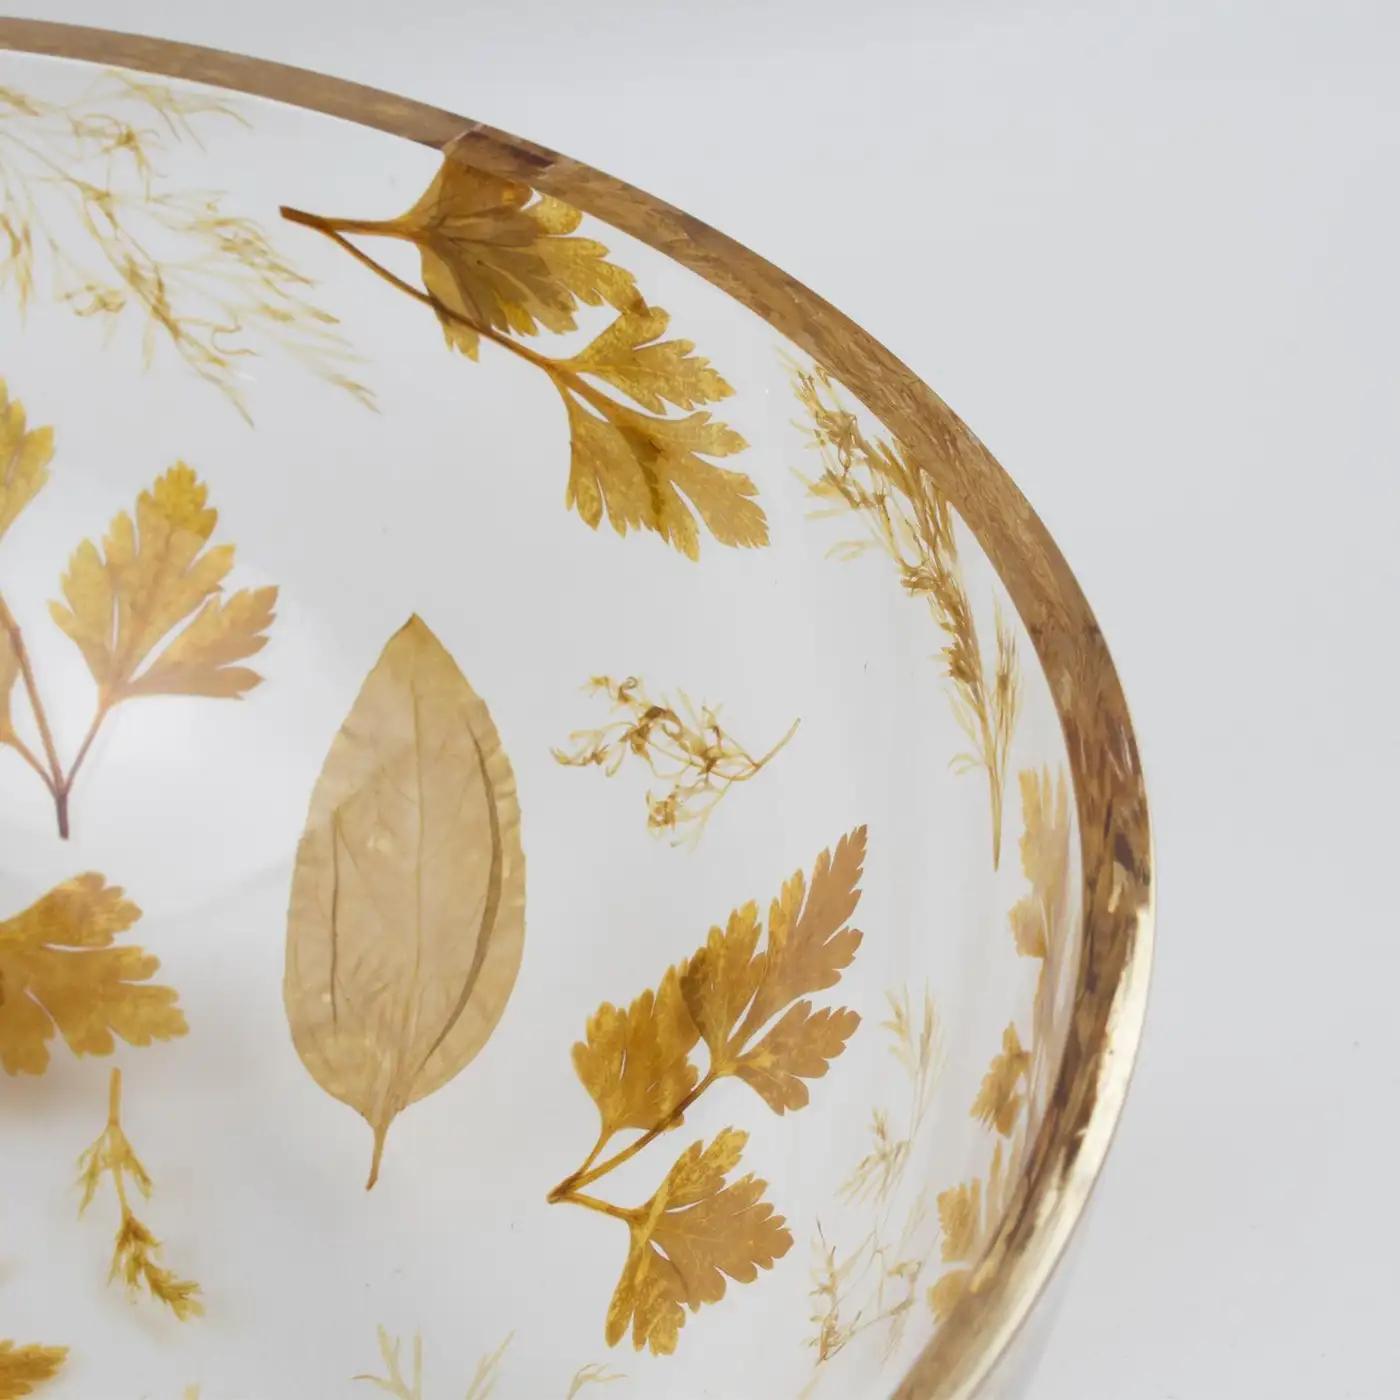 Resin Centerpiece Serving Bowl with Leaves Inclusions, Italy 1970s In Excellent Condition For Sale In Atlanta, GA